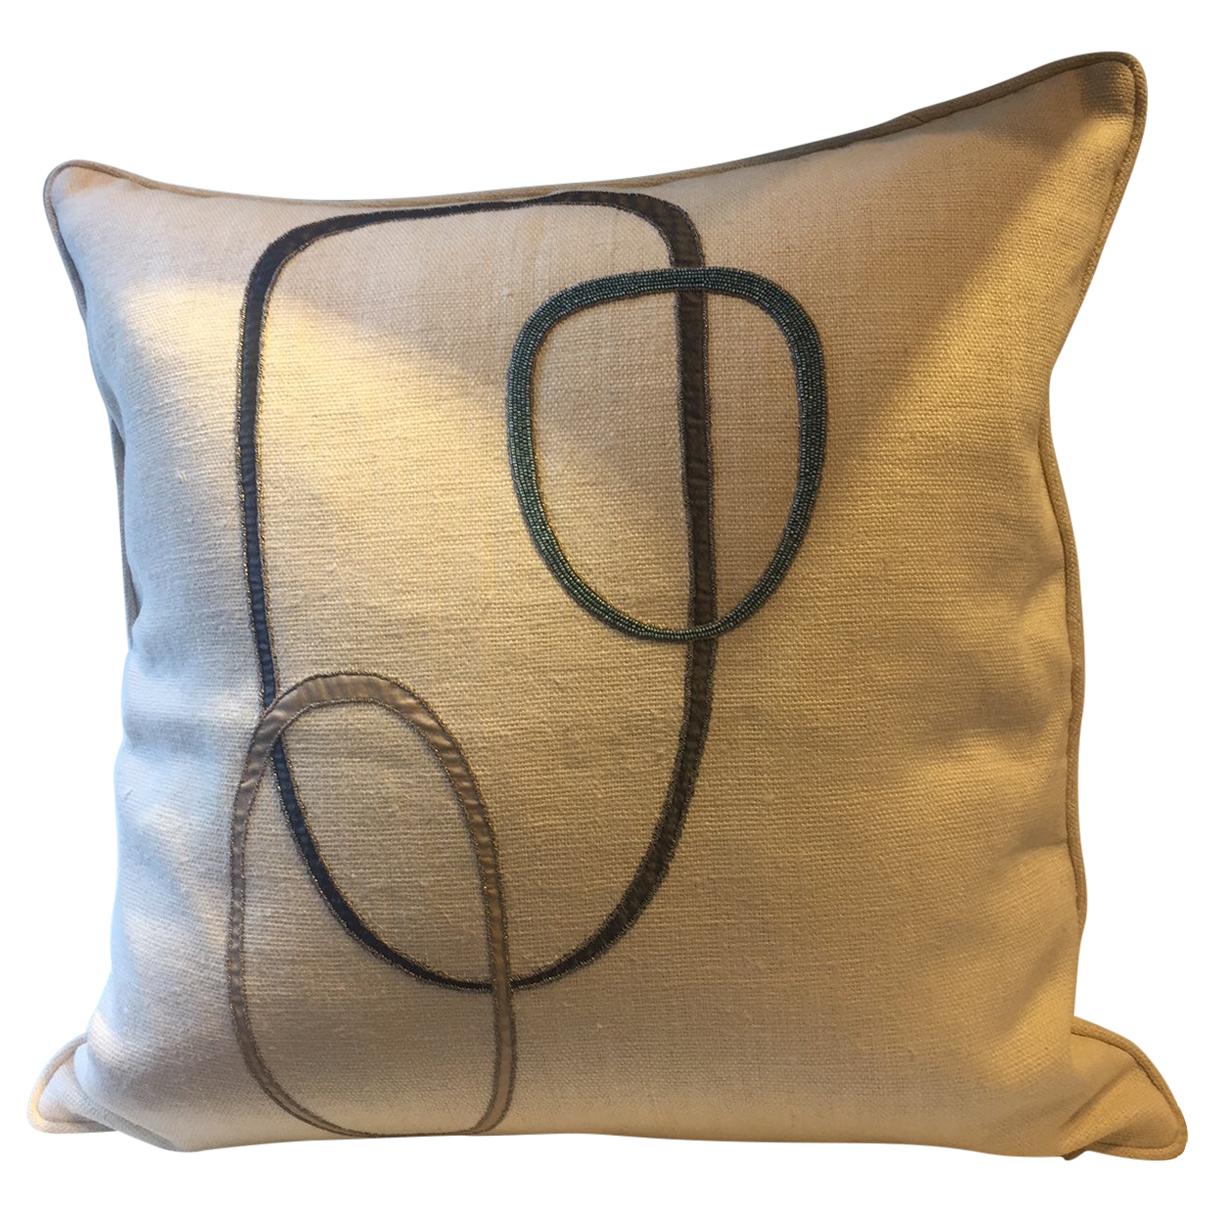 Decorative Cushion Linen Color Oyster with Contemporary Design Hand Embroidery